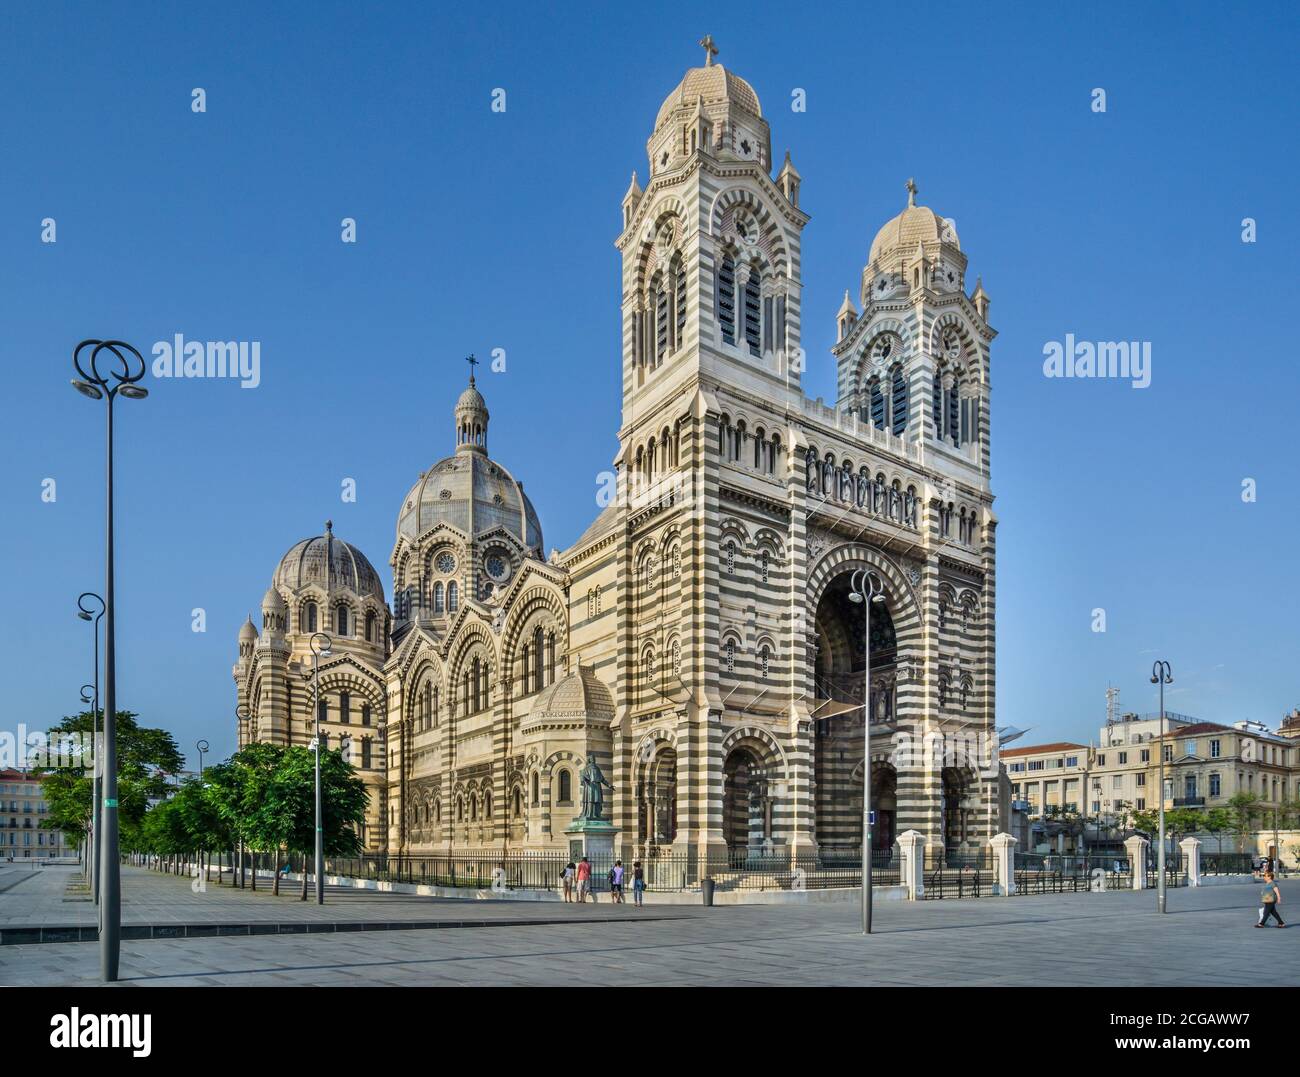 view of the Romanesque-Byzantine Revival Marseille Cathedral or Cathedral of Saint Mary Major, Marseille, Bouches-du-Rhône department, France Stock Photo